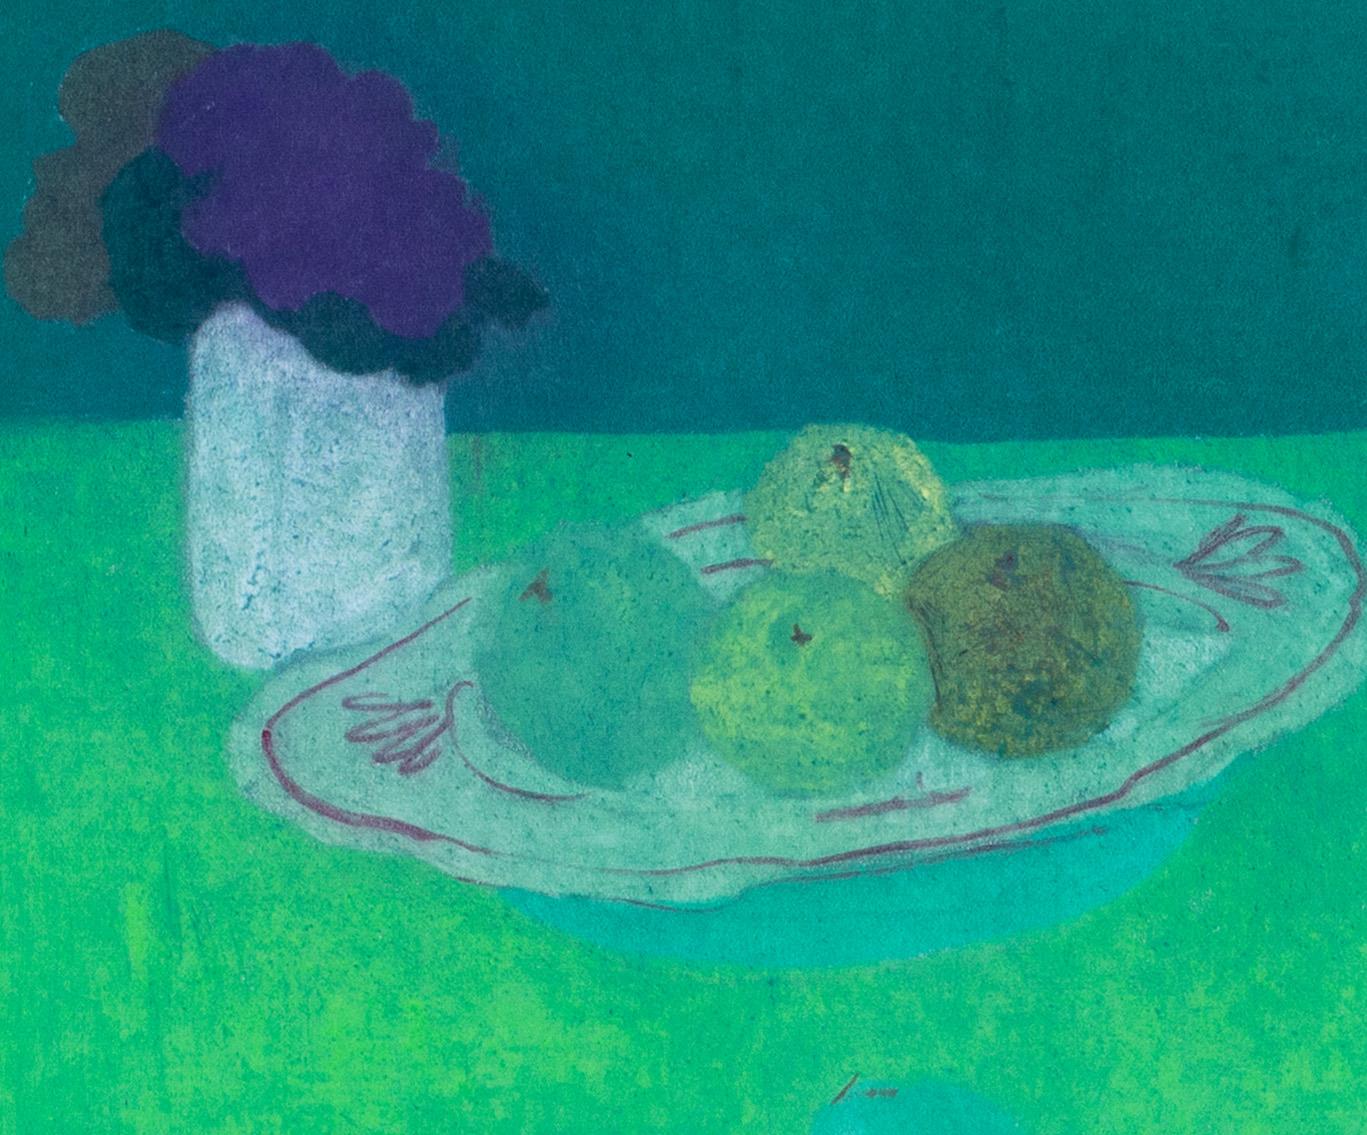 Bernard Myers (British, 1925 – 2007)
Still life on green
Signed ‘B Myers’ (lower left)
Pastel on paper
19.1/4 x 27 in. (49 x 68.7 cm.)

Bernard Myers studied for two years at St Martins School of Art and furthered his studies at the Royal Collage of